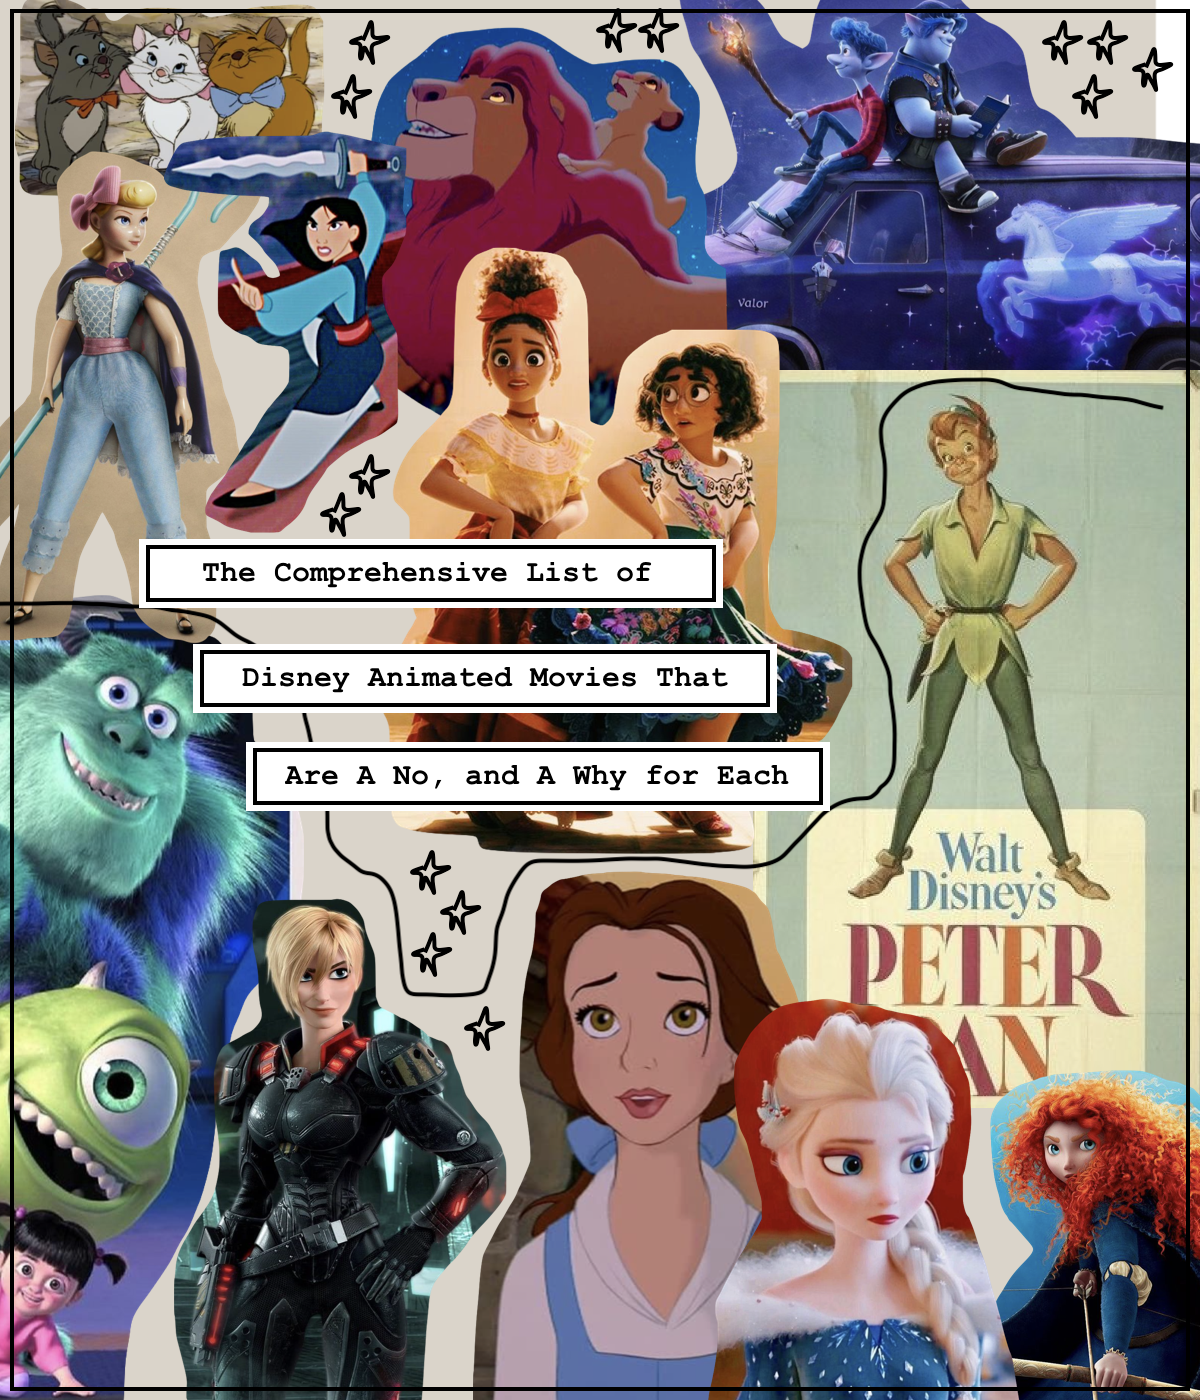 The Comprehensive List of Animated Disney Movies That Are a No, and A Why for Each